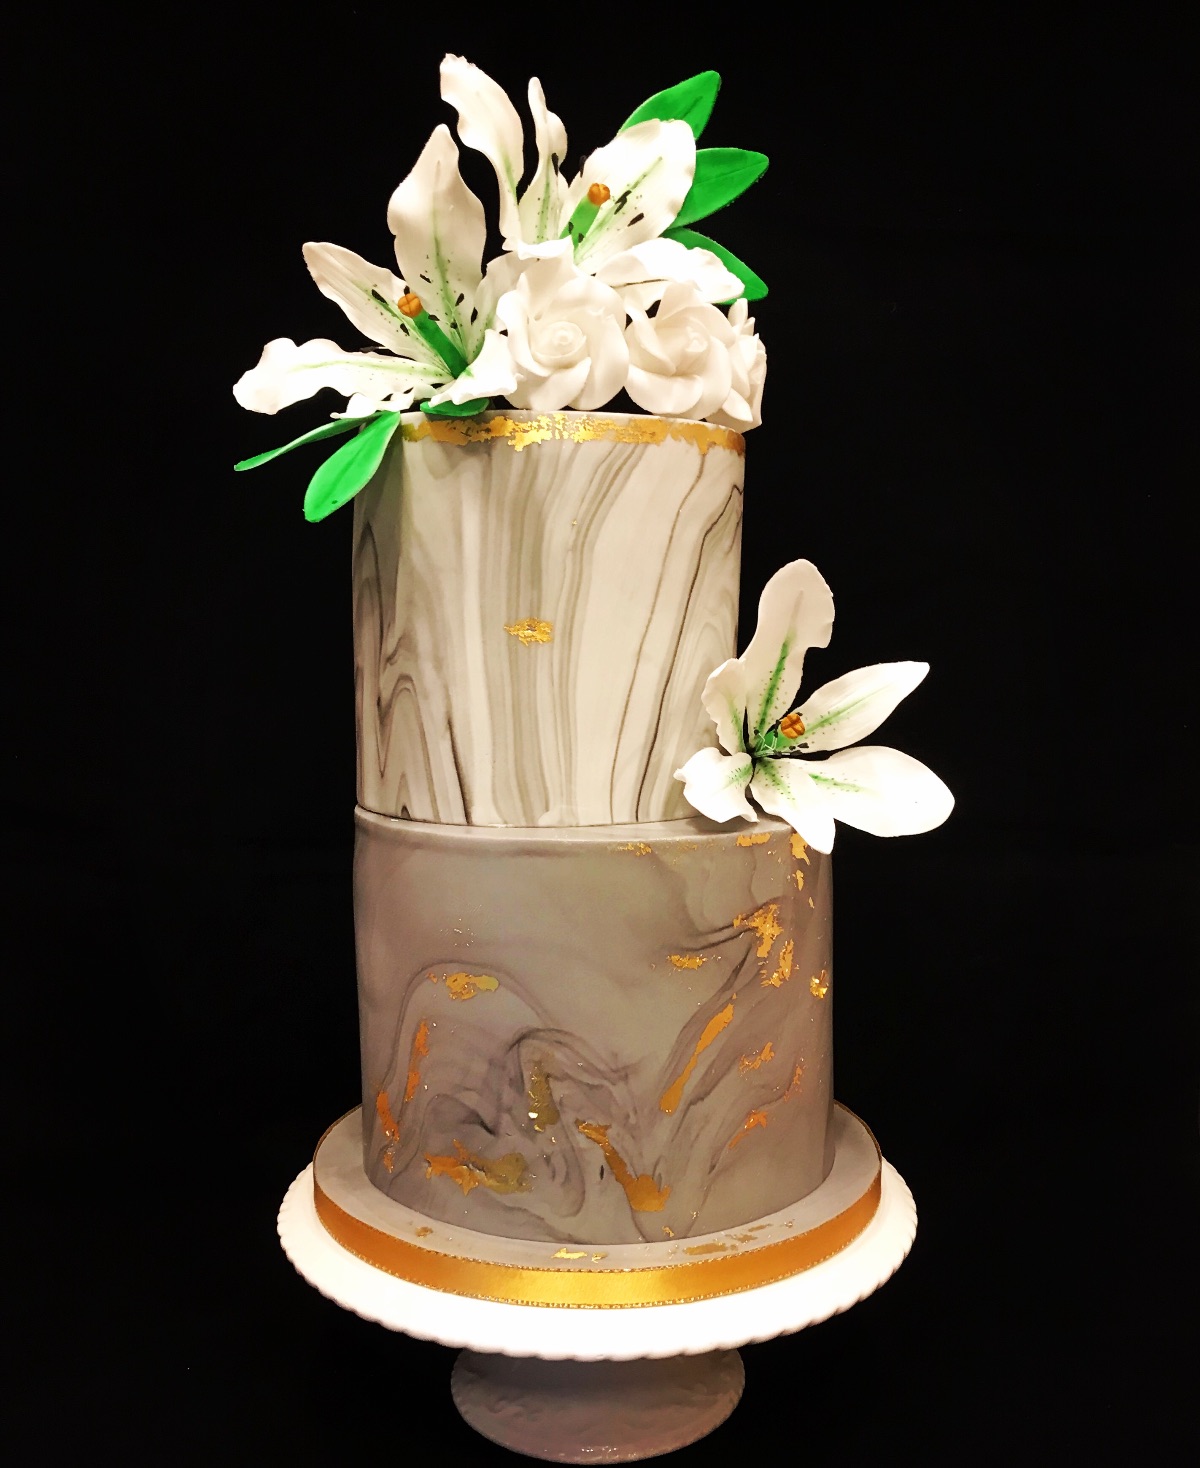 Clock Tower Cakes-Image-24